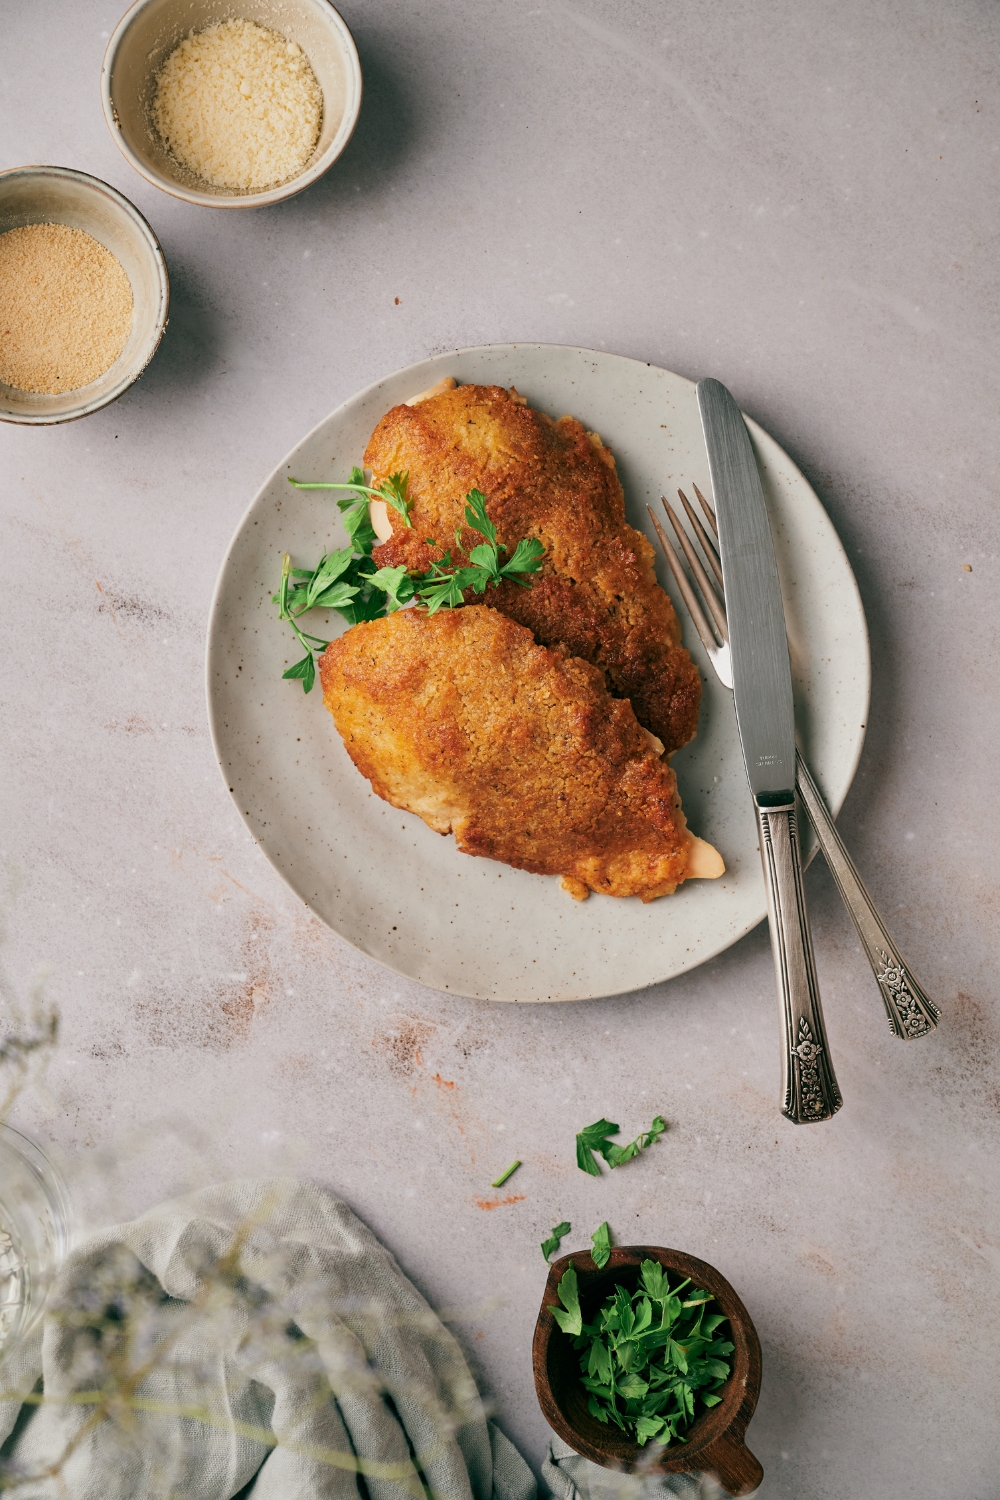 Two freshly baked and breaded chicken breasts on a plate, garnished with fresh herbs with a set of silverware on the plate next to the chicken.